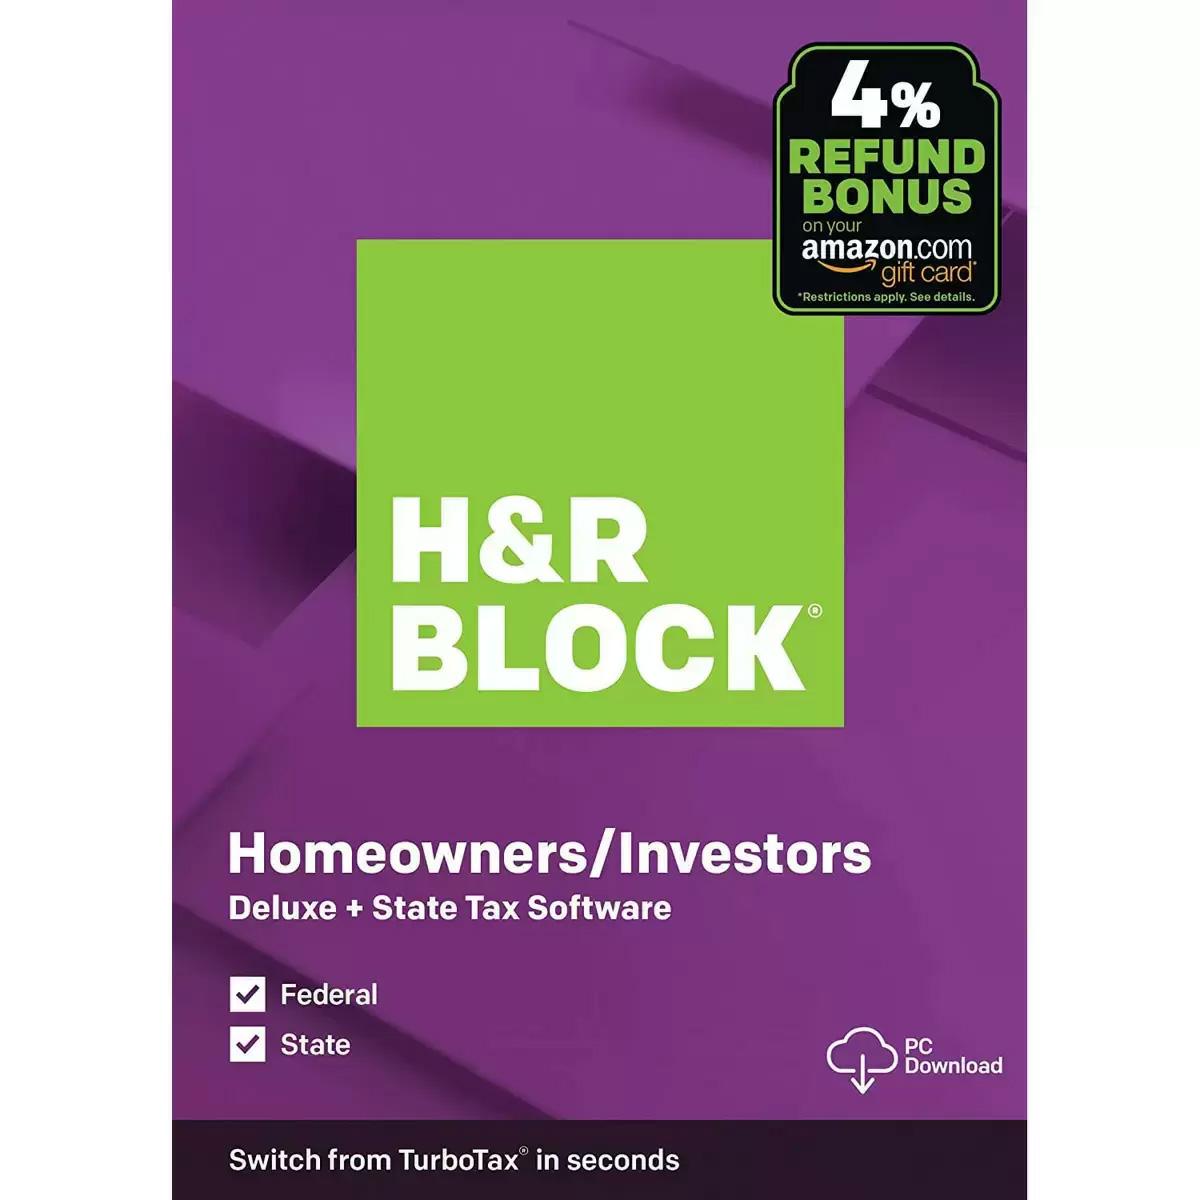 H&R Block Tax Software Deluxe 2020 for $16.99